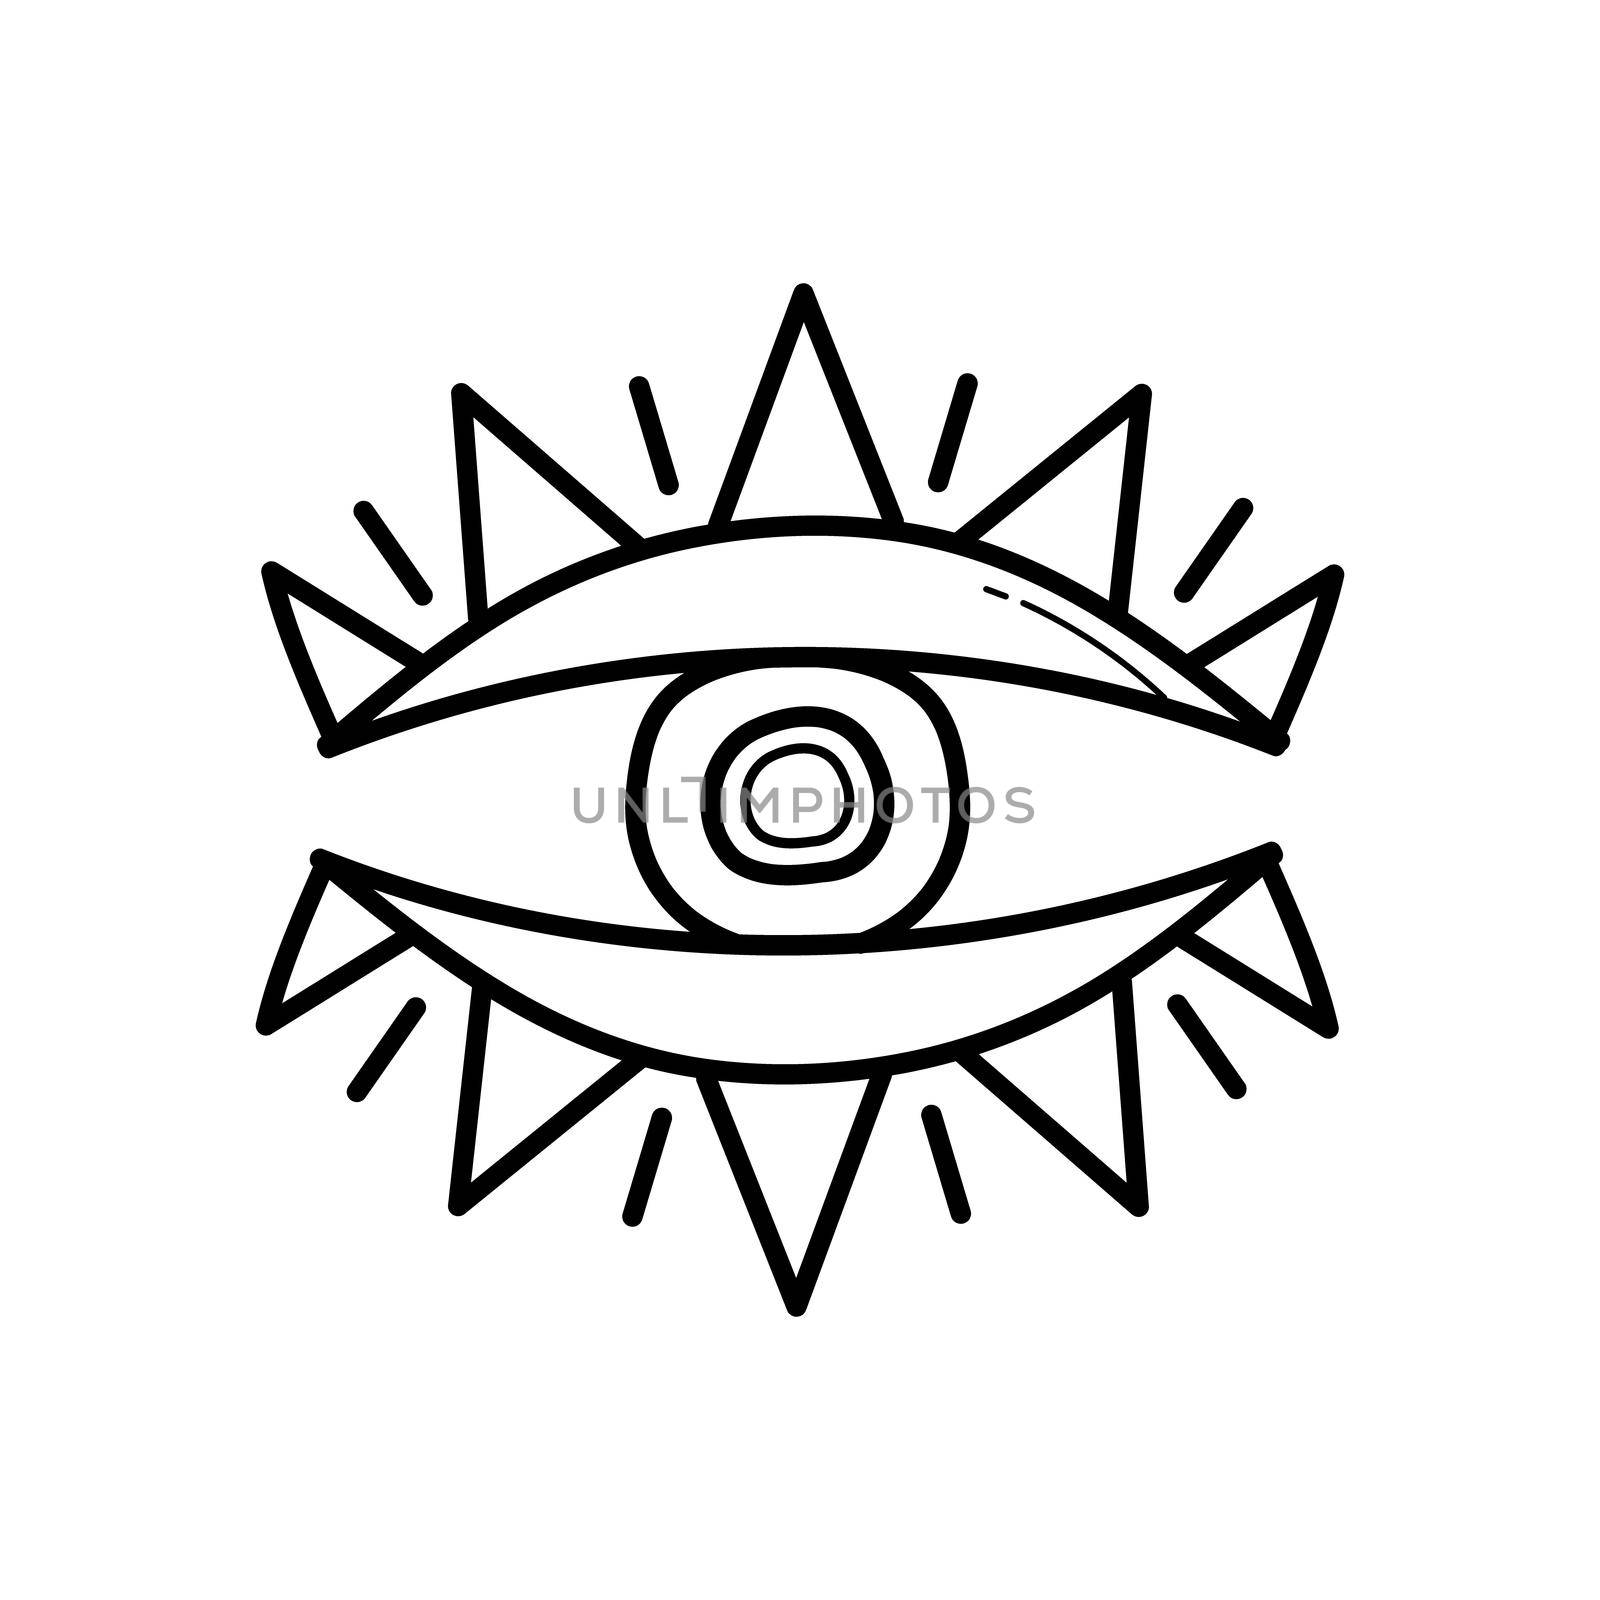 Eye mystic boho symbol. Abstract zen eye sign for design. Doodle simple icon by natali_brill